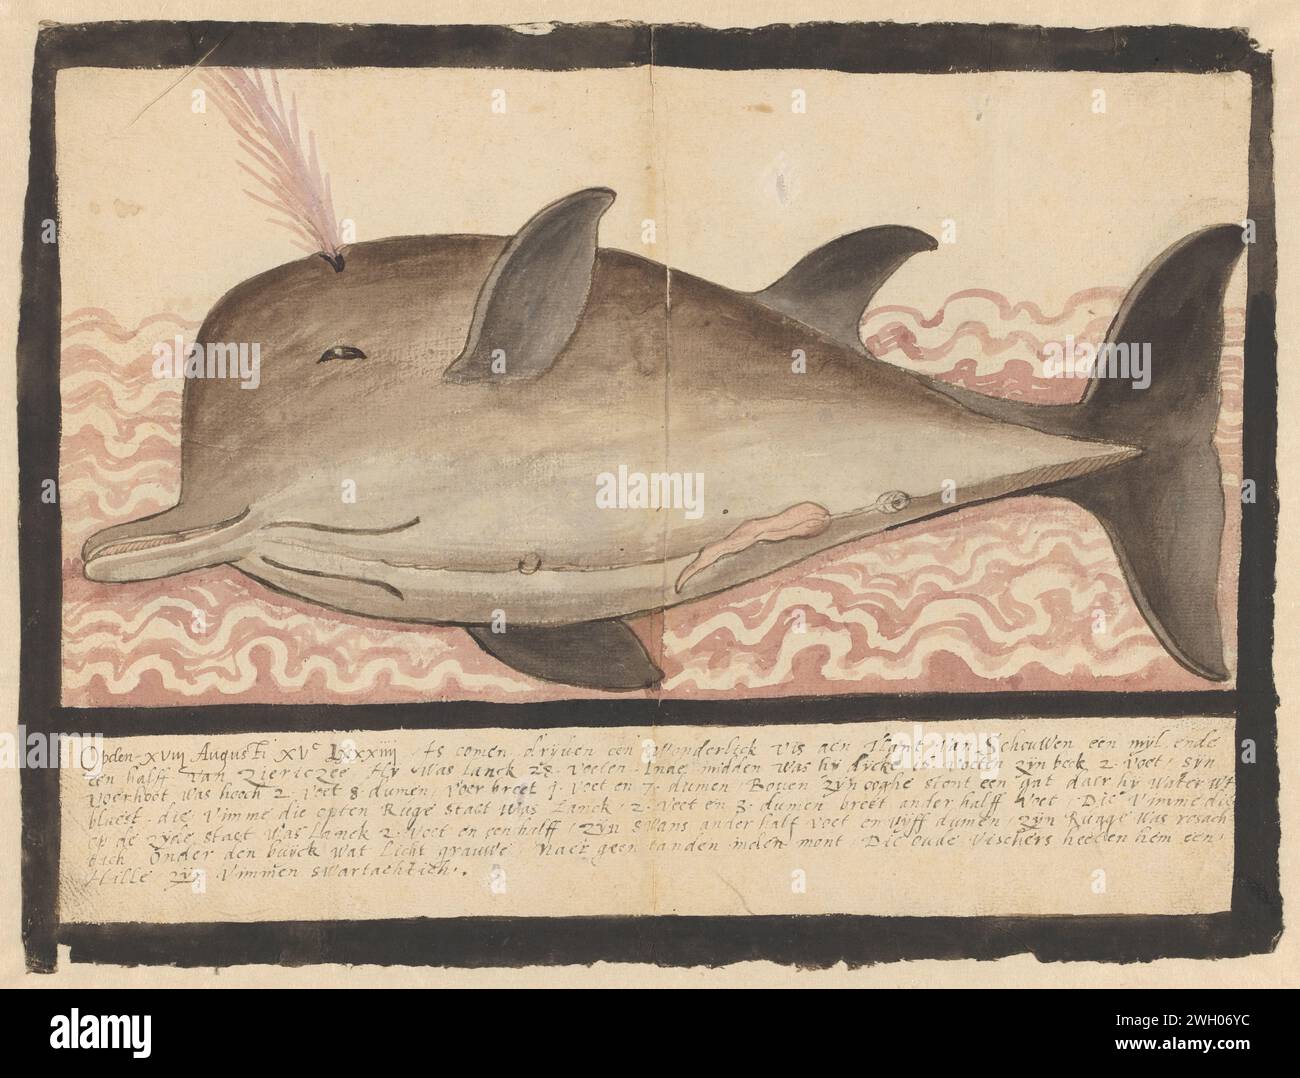 Buttenosis Whale (Hyperoodon Rostratus), Adriaen Coenen, 1584 drawing  Zeeland paper. ink. graphite (mineral) pen / brush swimming mammals: whale Stock Photo